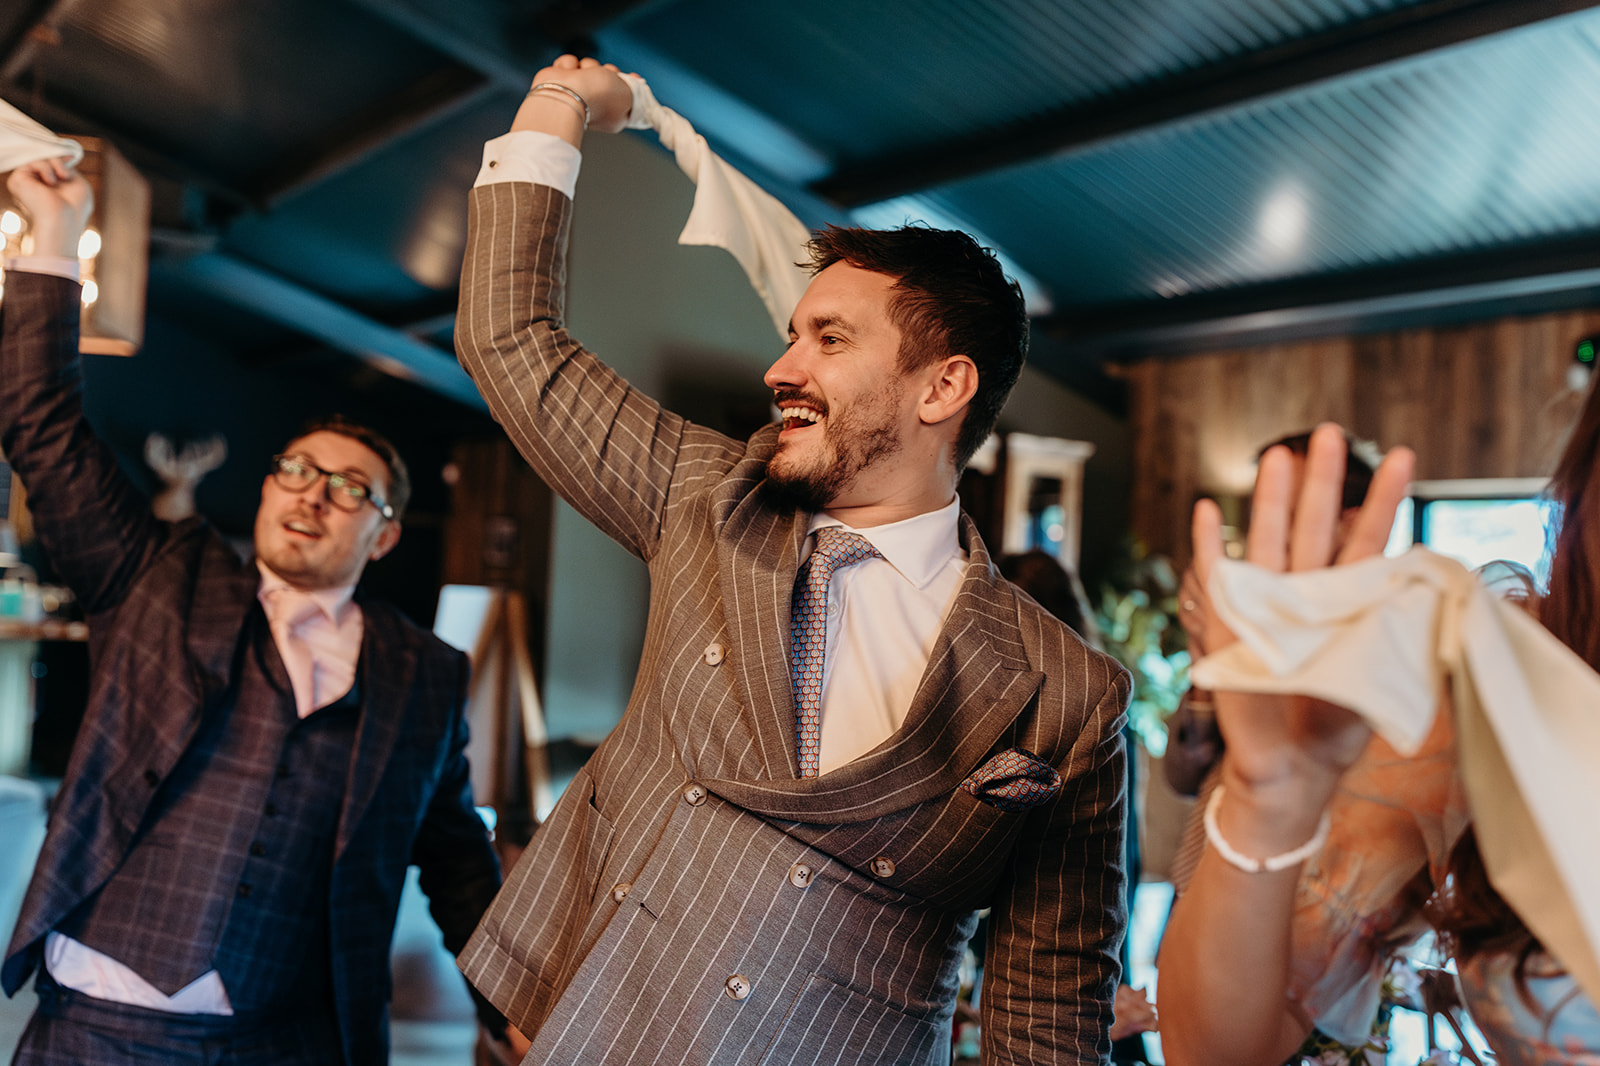 Guests cheering and waving napkins as the newlyweds dance between tables at their Silchester Farm wedding reception.